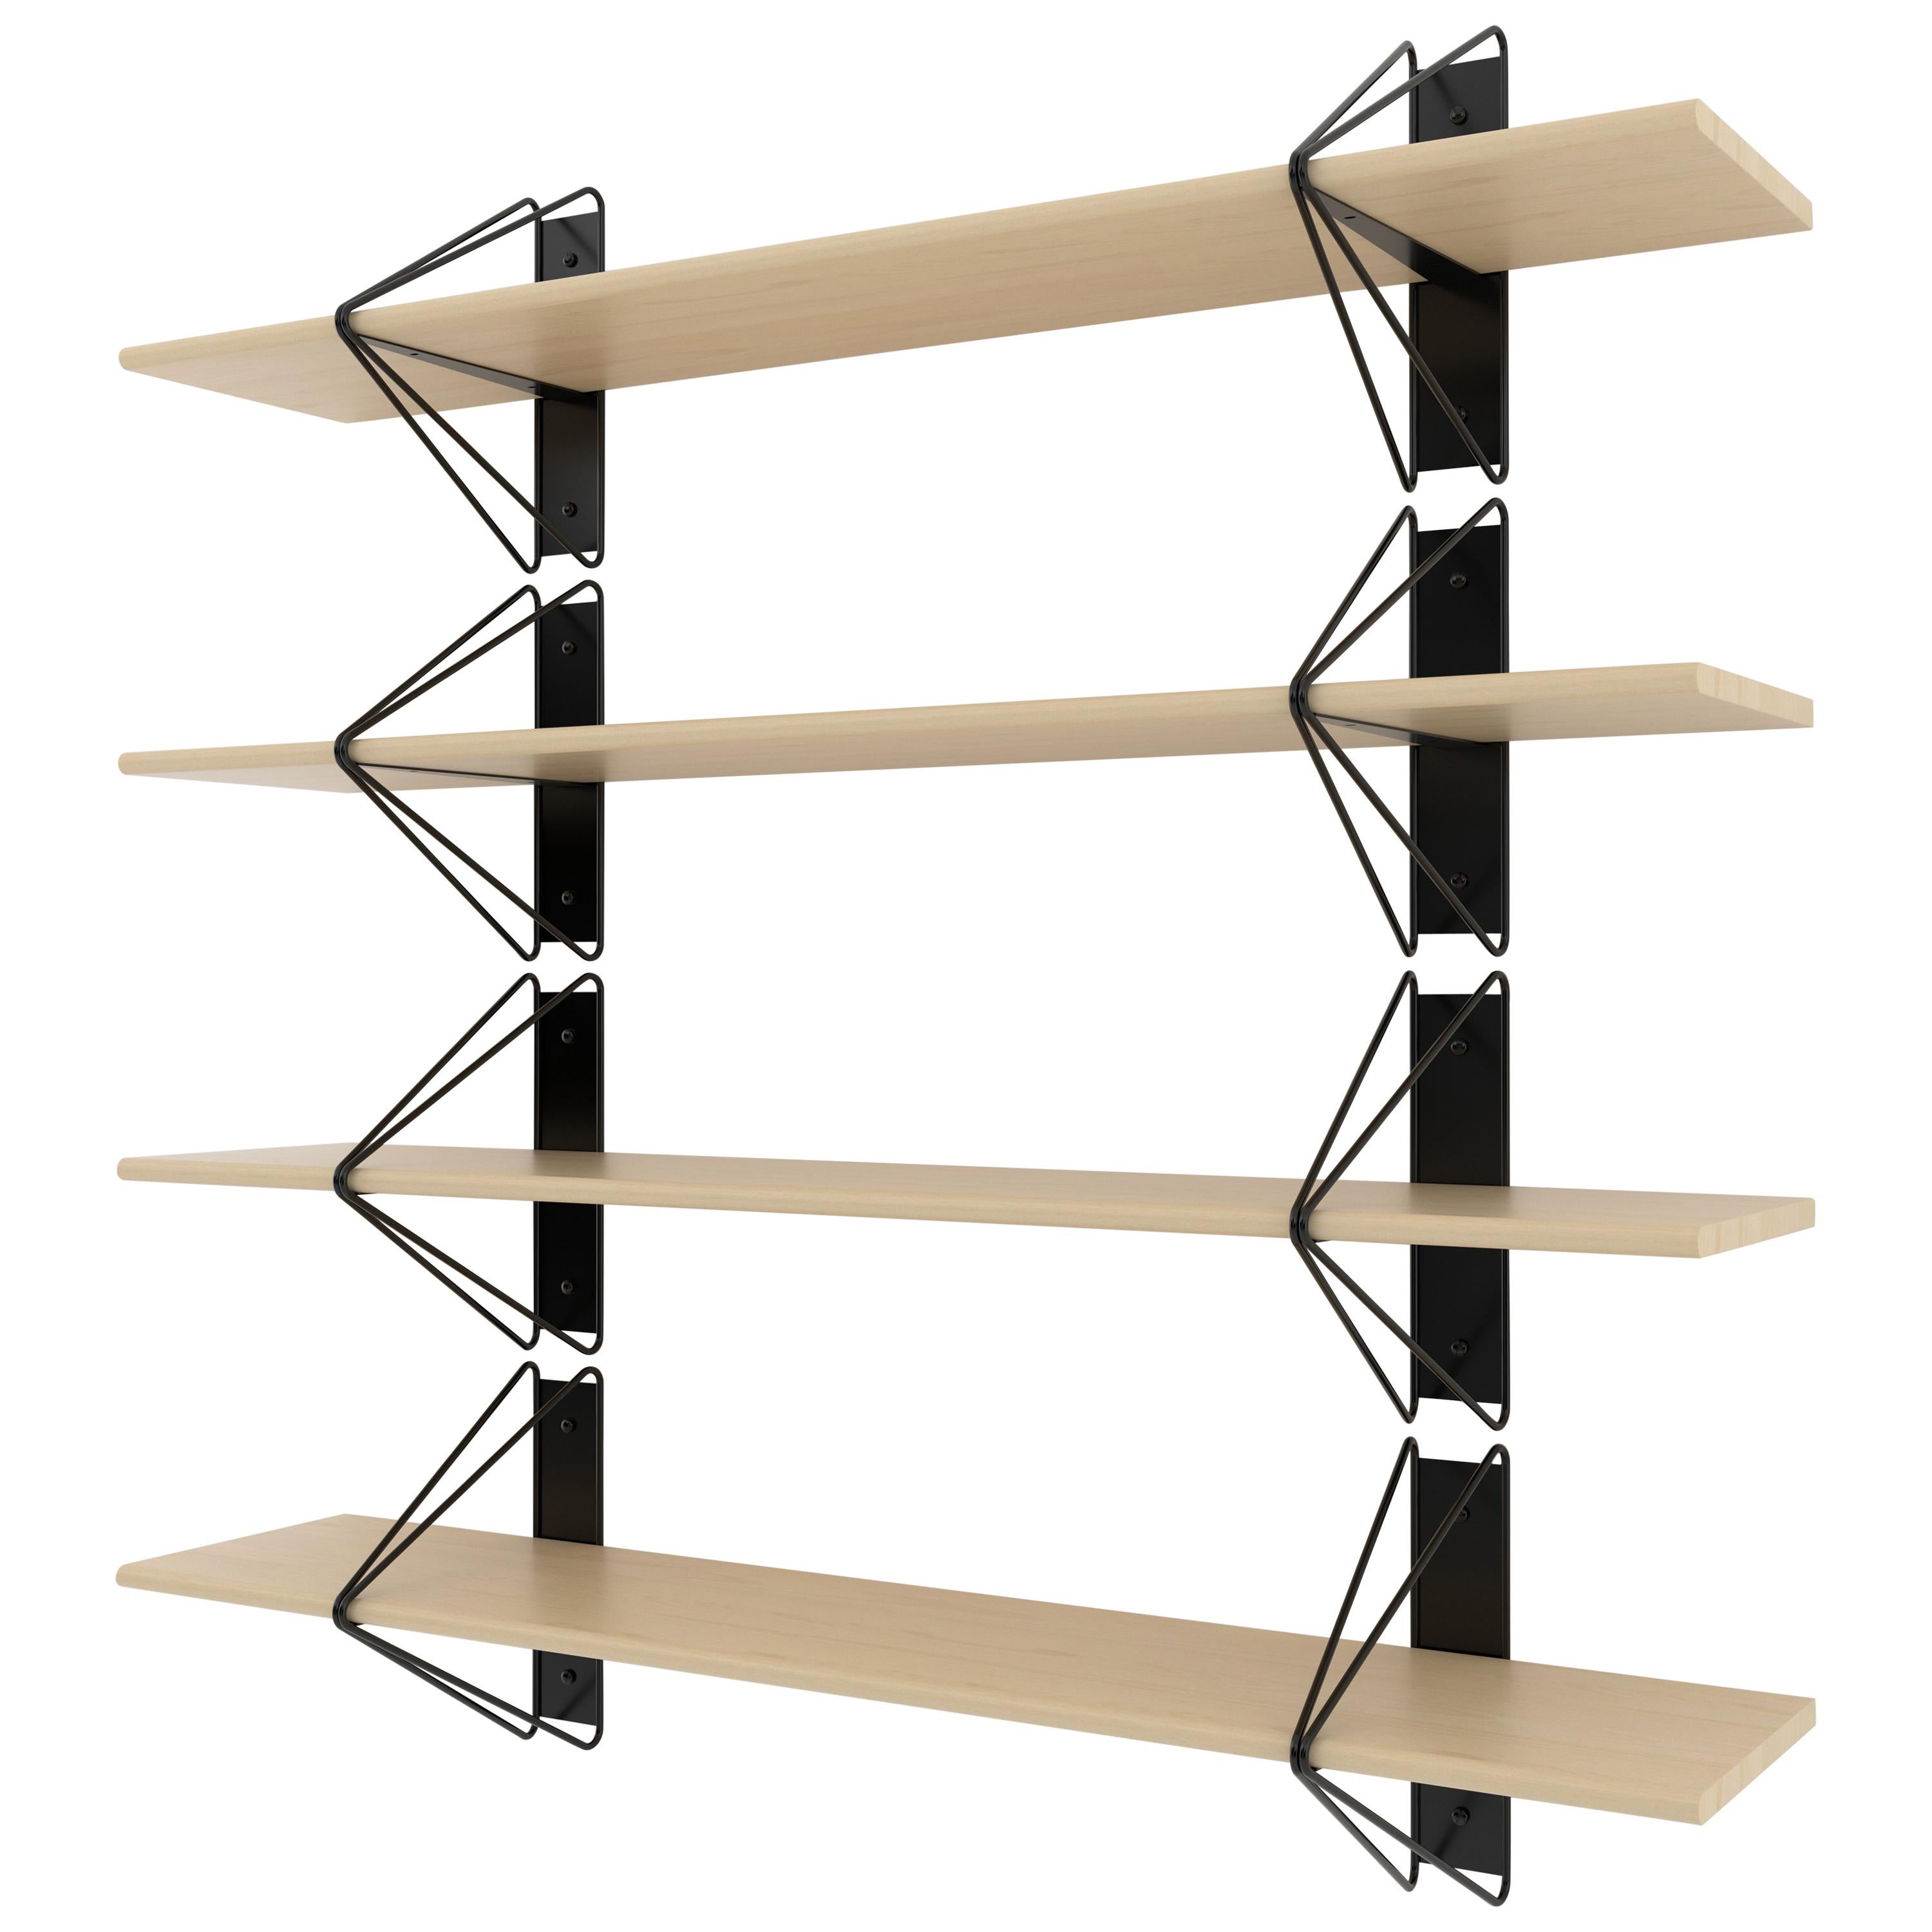 American Set of 3 Strut Shelves from Souda, Black and Maple, Made to Order For Sale